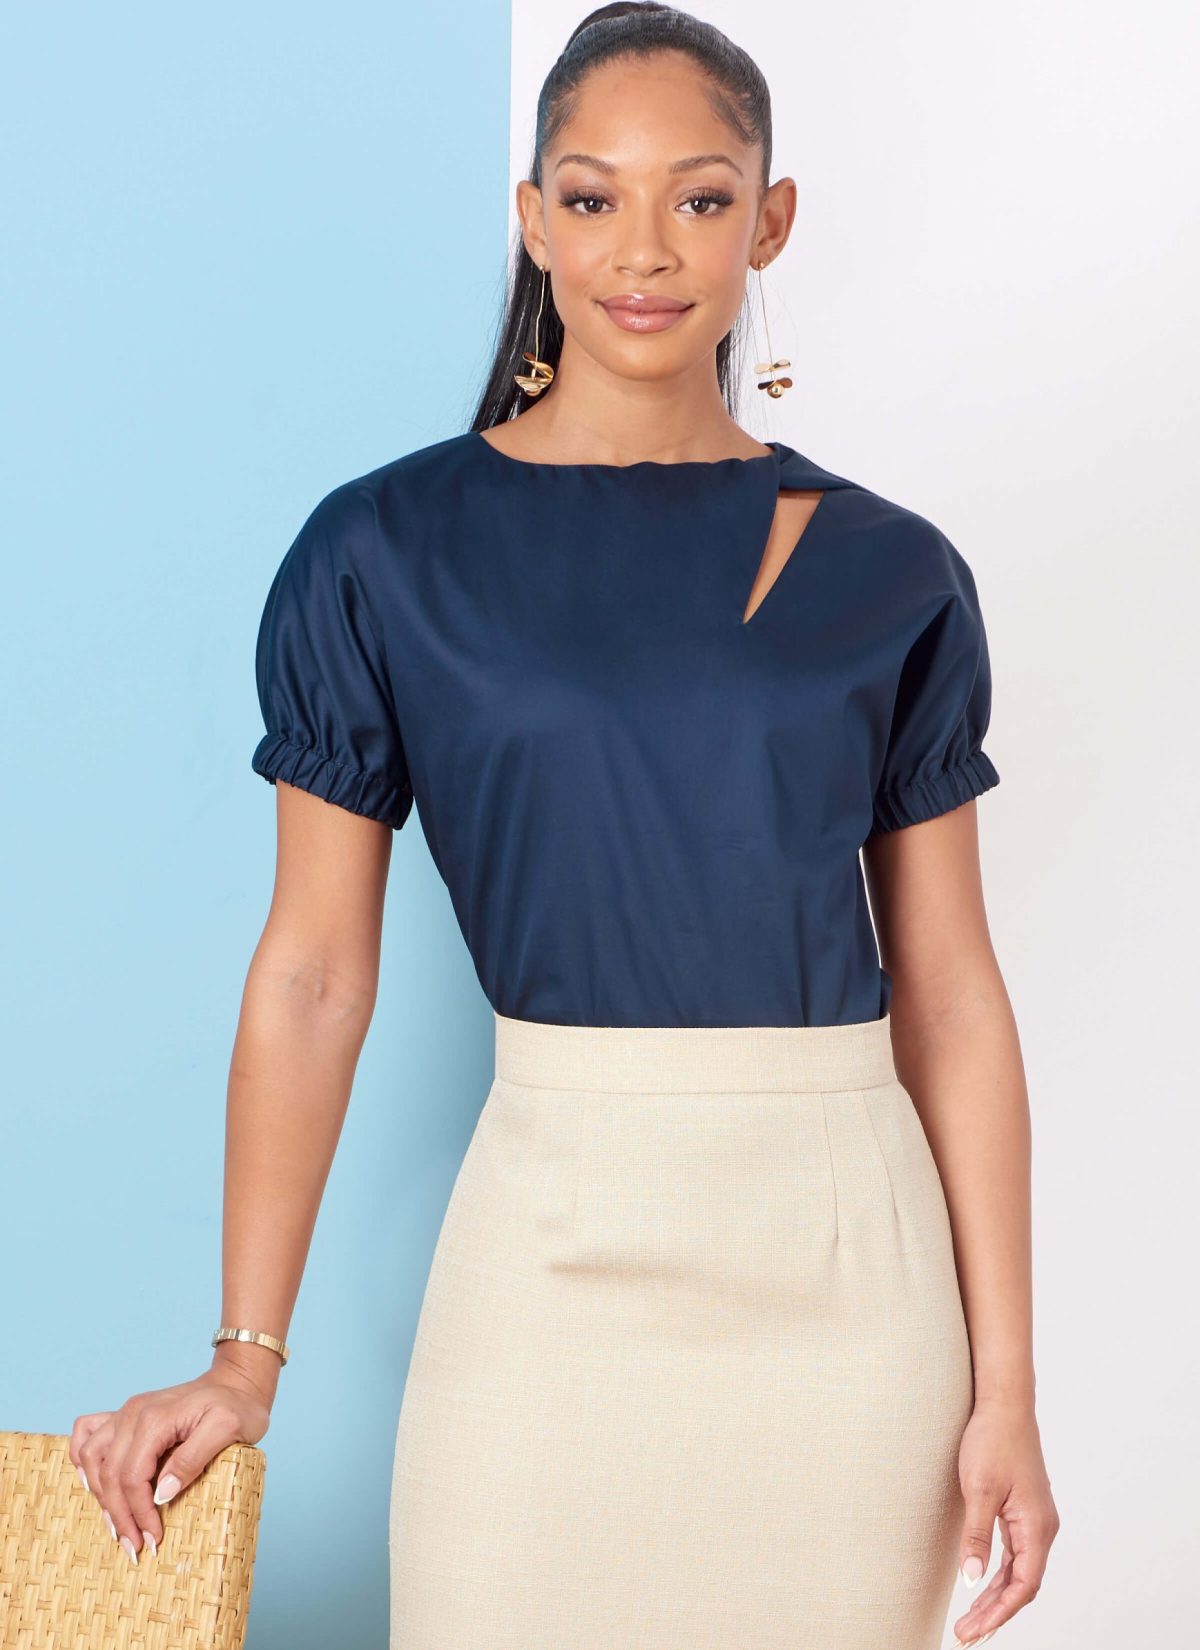 Butterick Sewing Pattern B6875 Misses' Tops